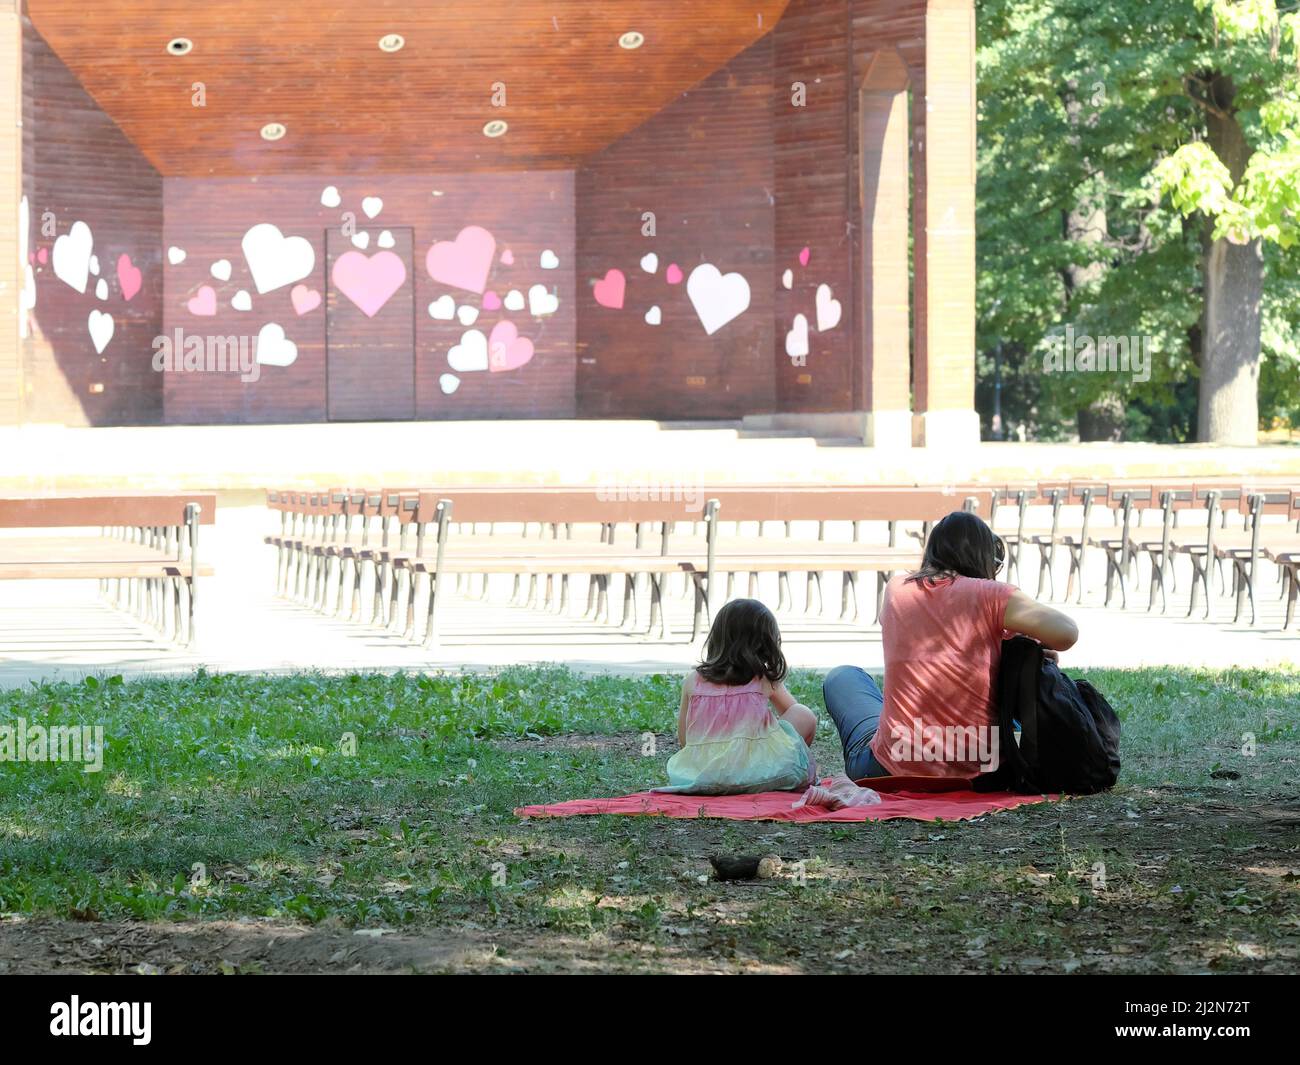 woman and child sitting in a sofia park in front of theater scene decorated with shape of heart Stock Photo